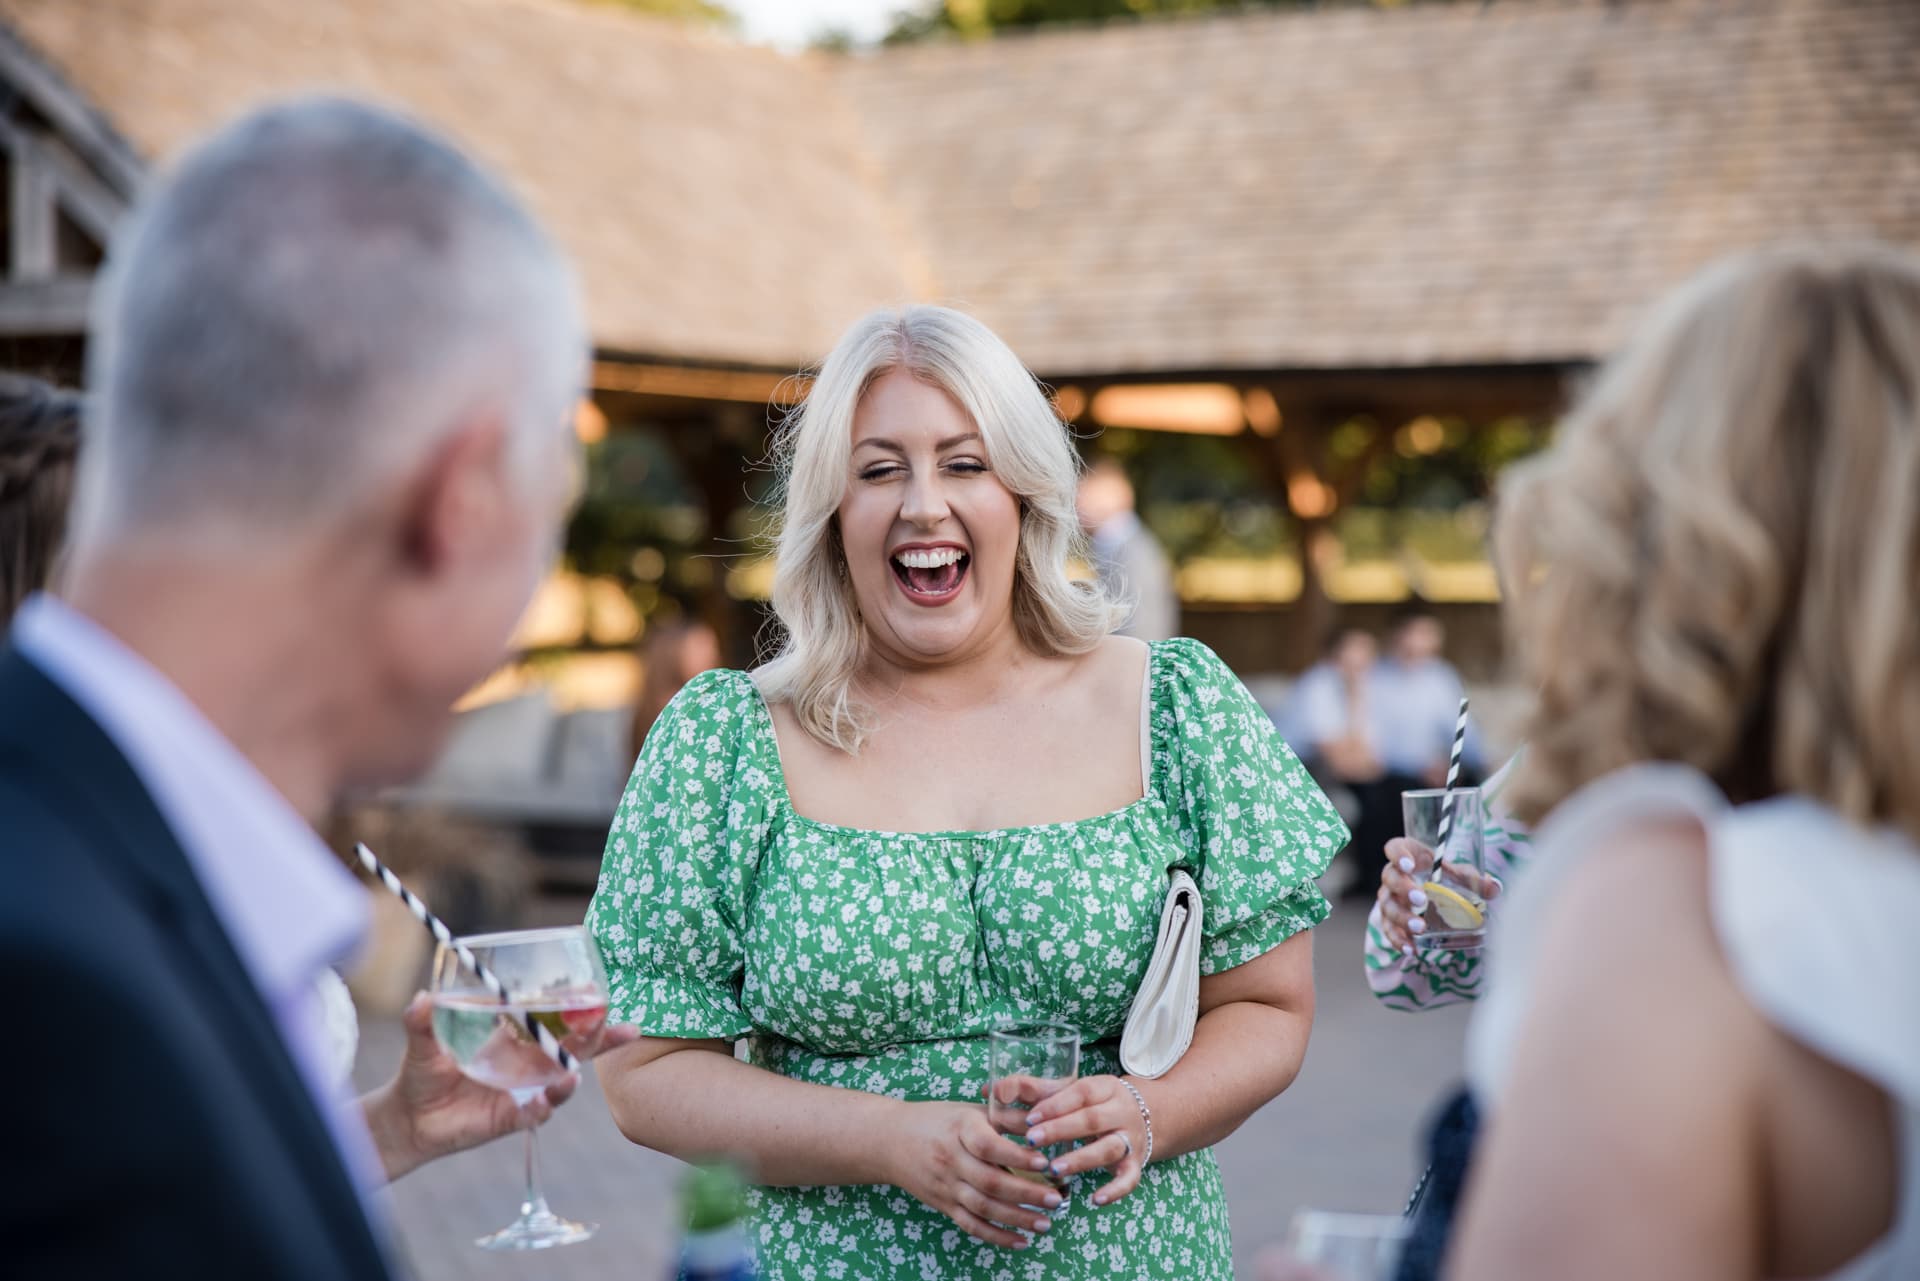 Lady in green dress laughing at wedding